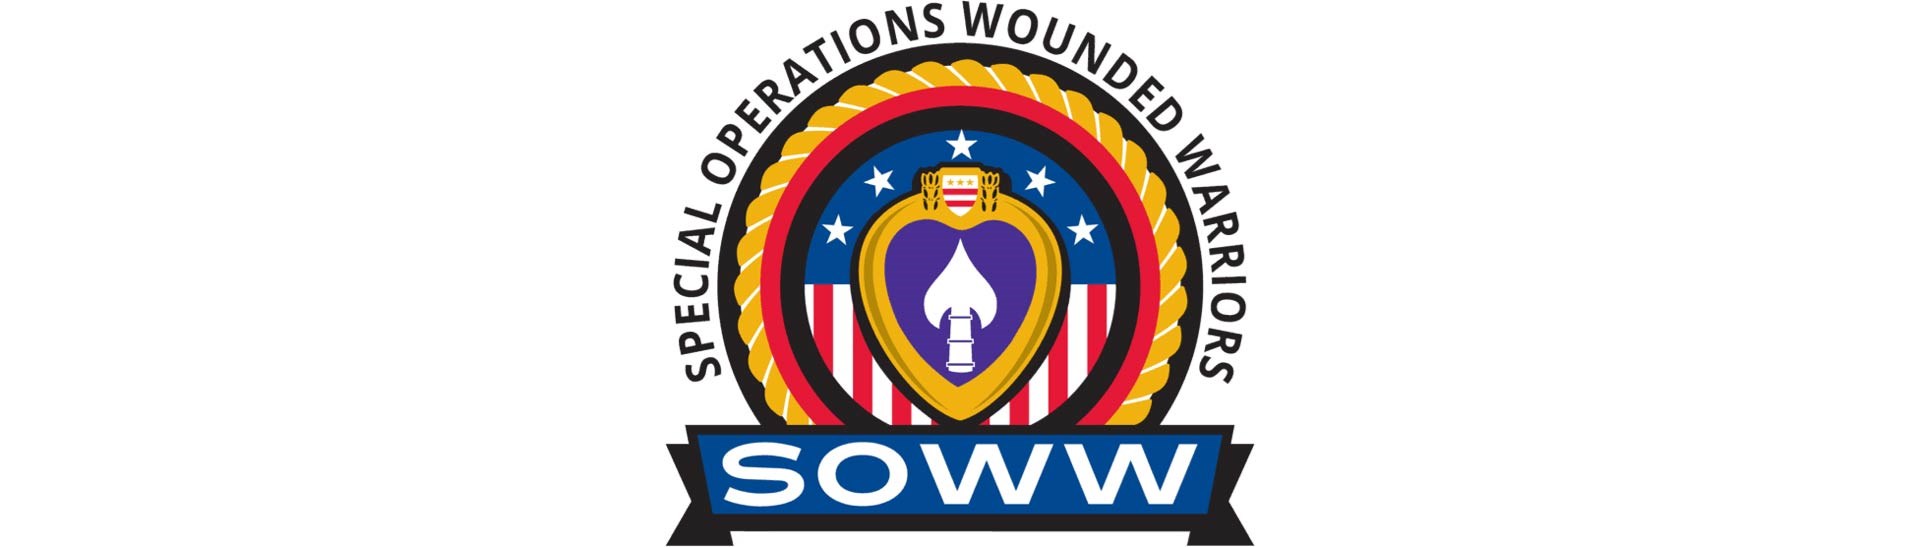 SOWW Special Operations Wounded Warriors logo